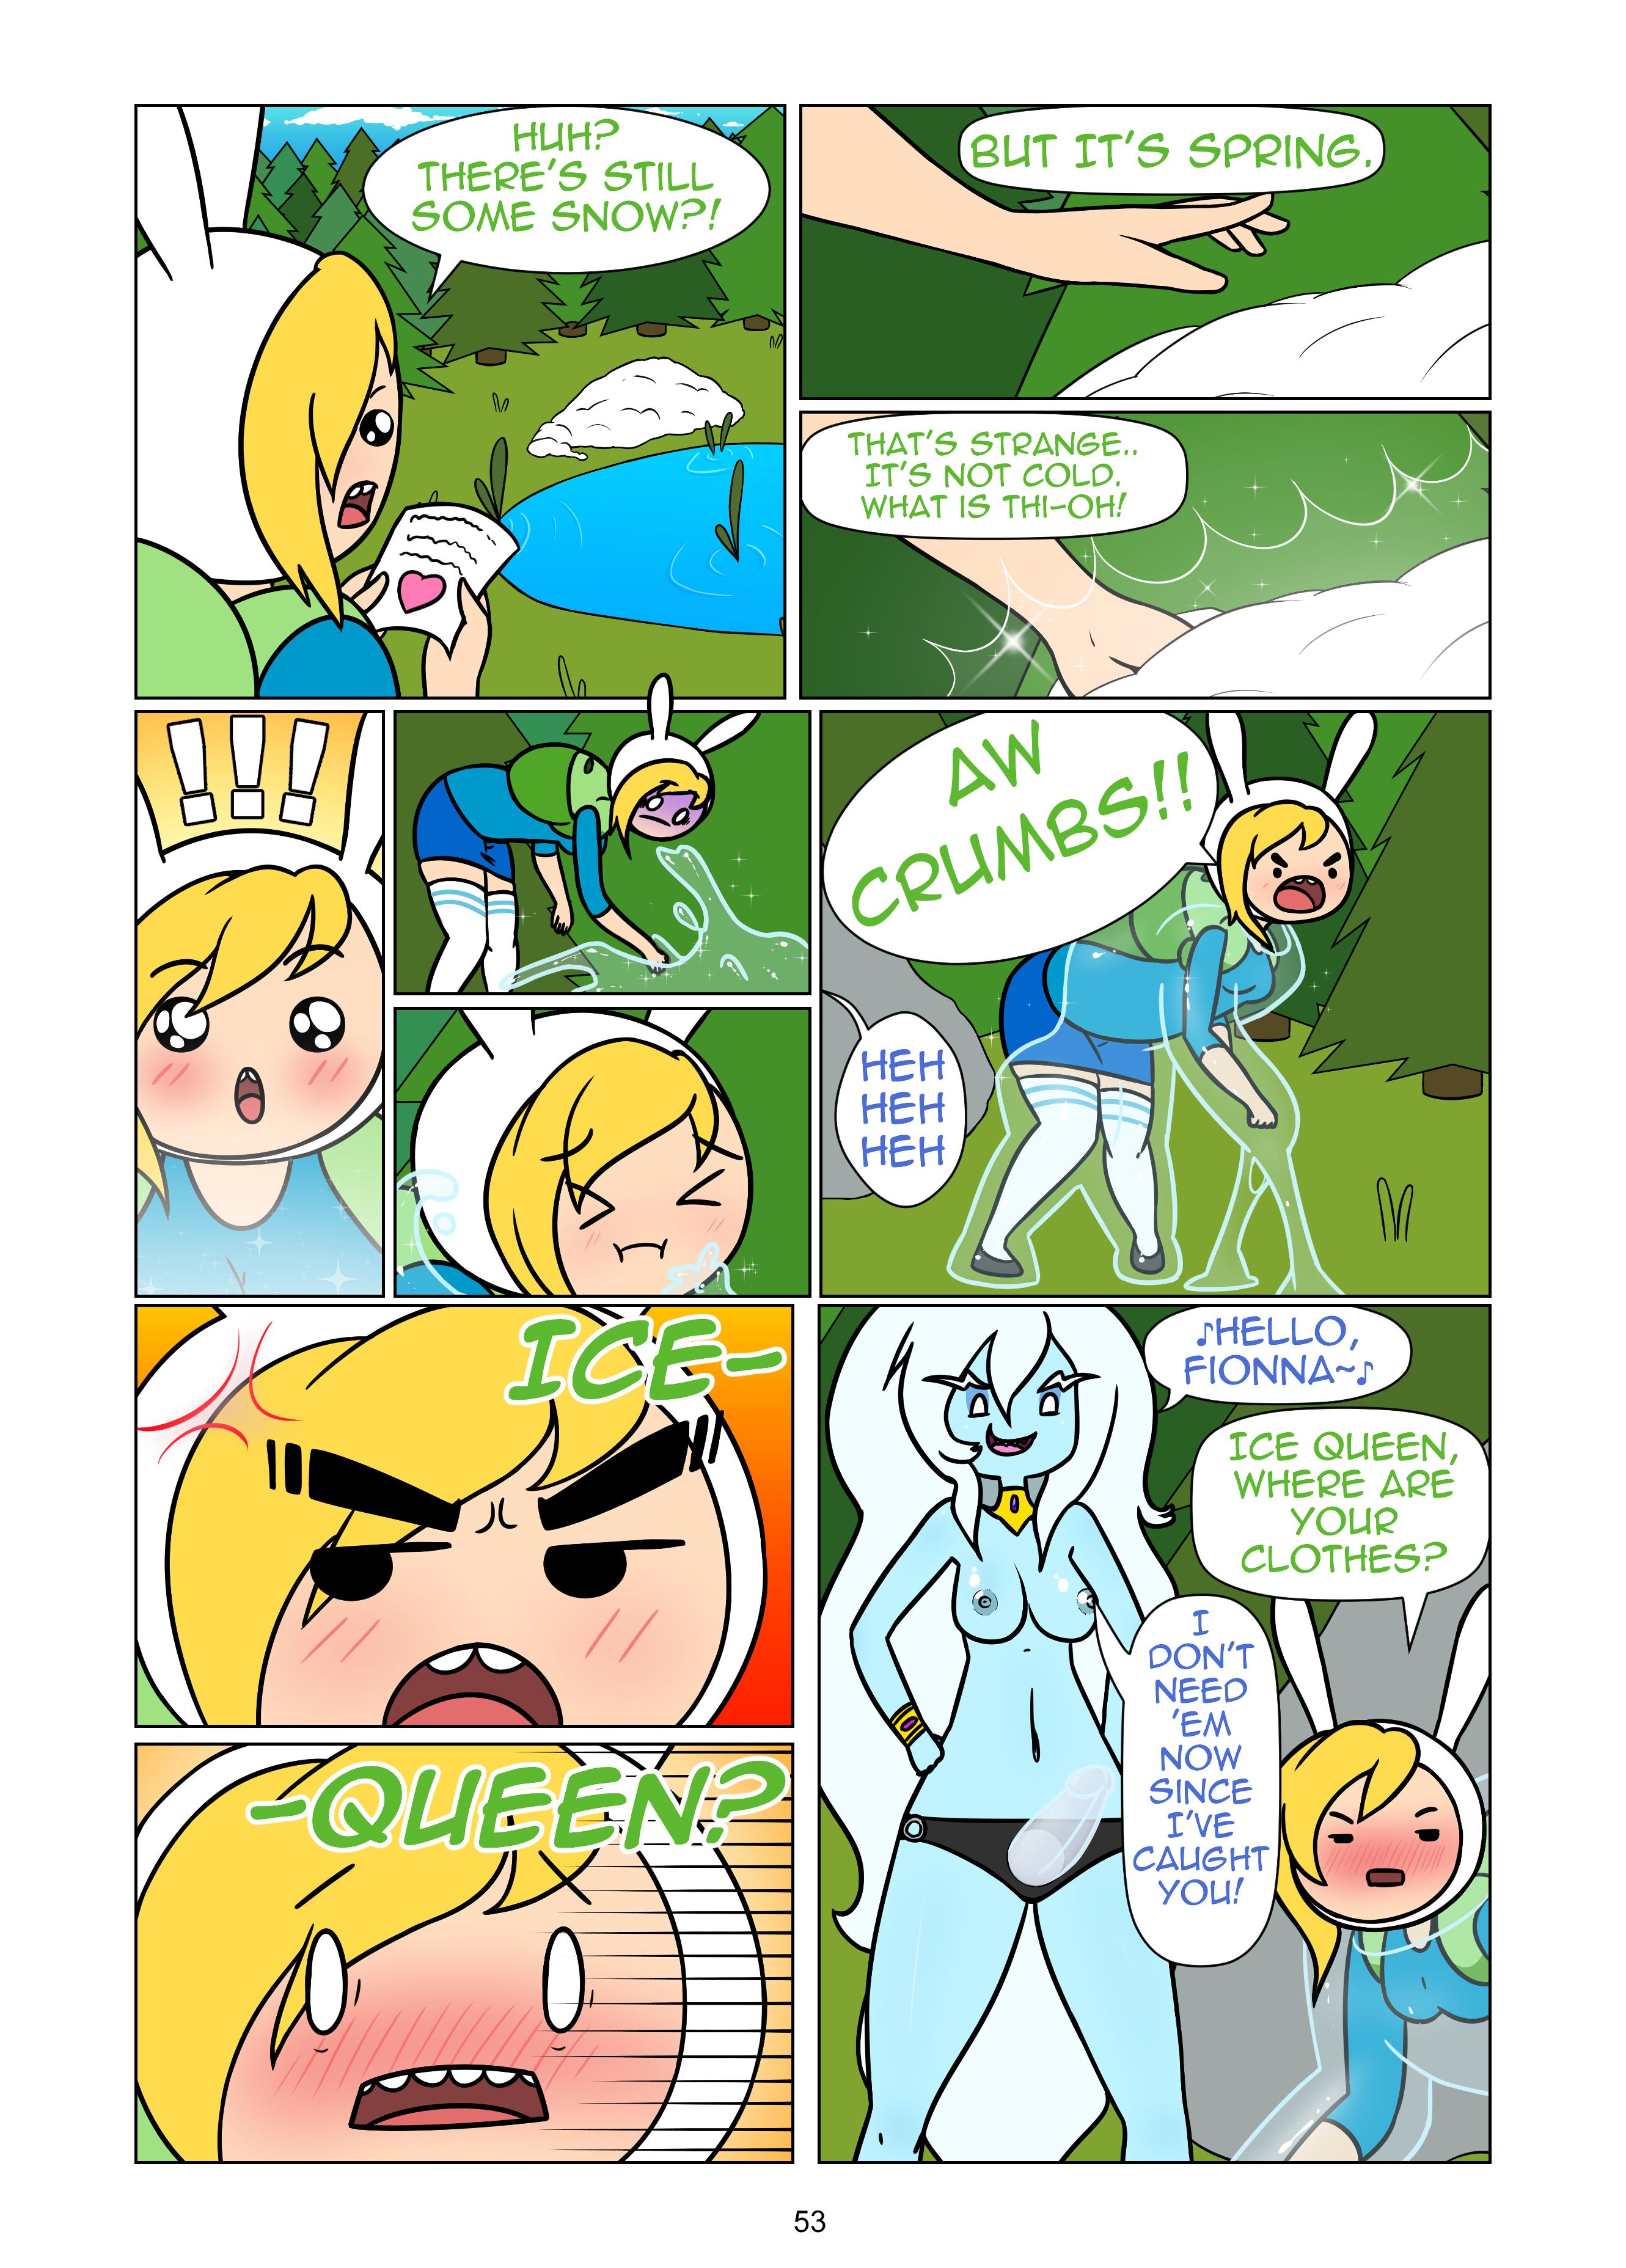 Mis-Adventure Time (Adventure Time) [Cubby Chambers] - Mis-Adventure Time -  The Collection - (Adventure Time) [Cubby Chambers] - AllPornComic